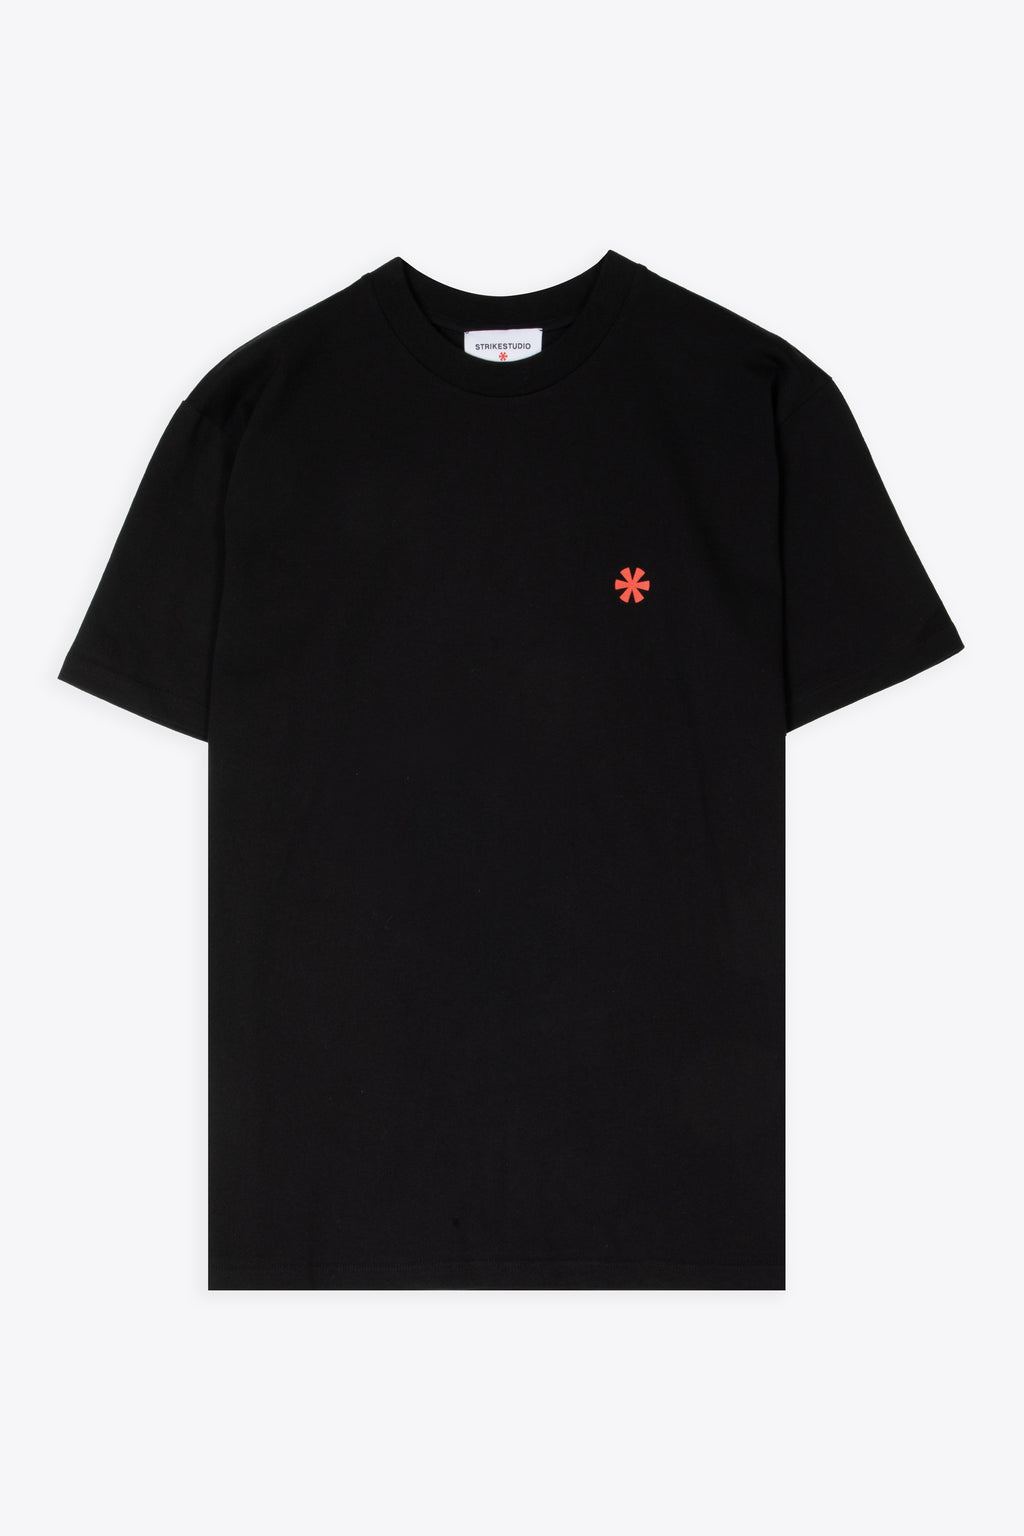 alt-image__Black-cotton-t-shirt-with-red-logo-printed